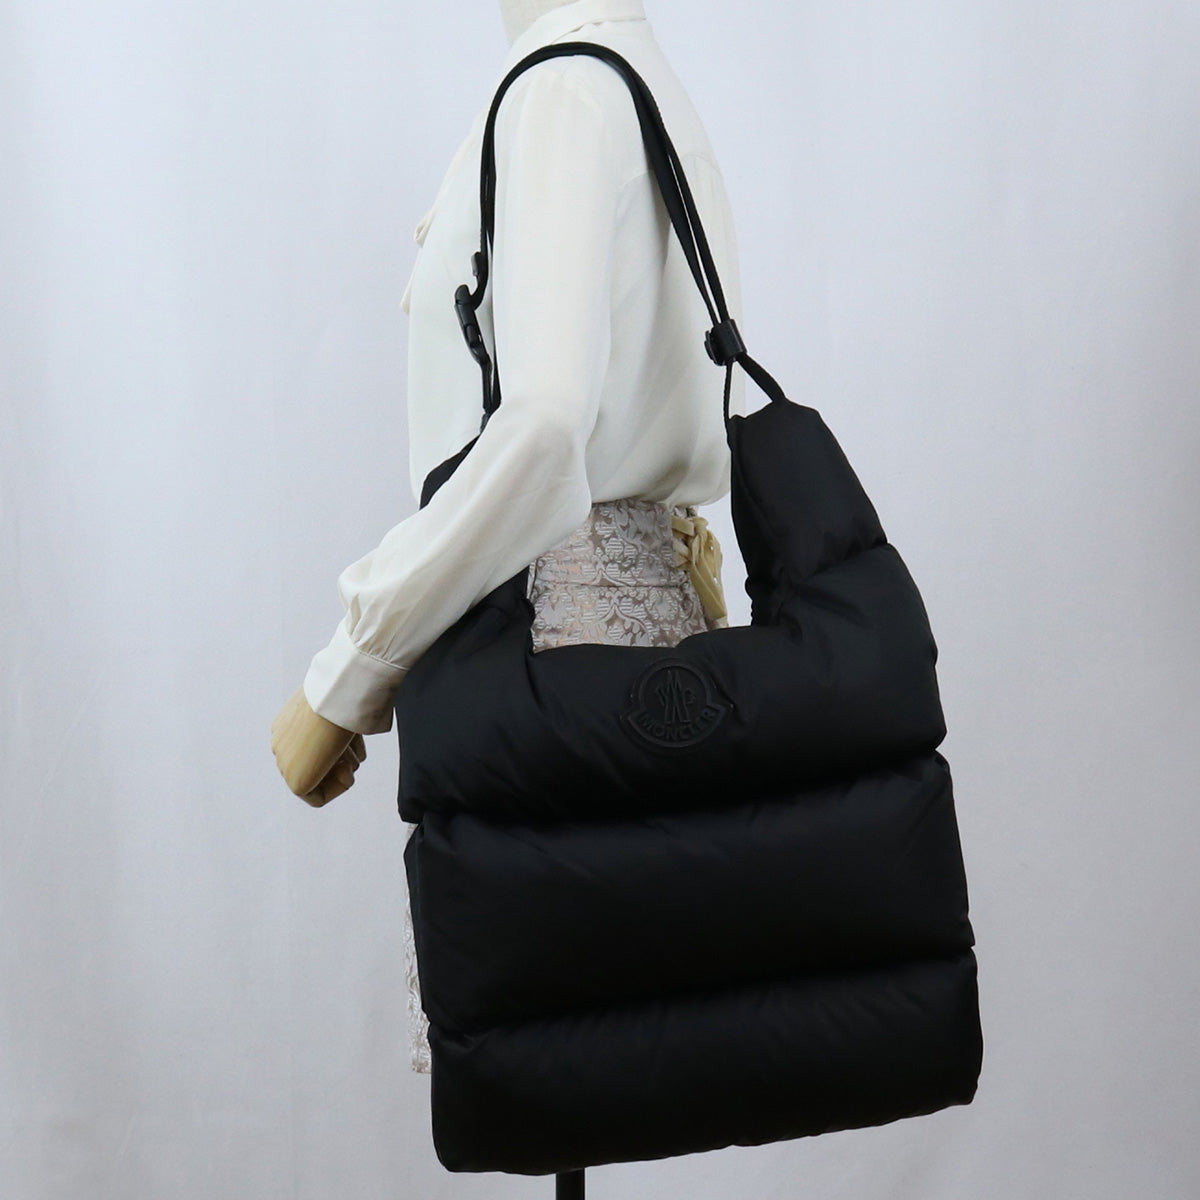 MONCLER モンクレール LEGERE TOTE LARGE 5D50800 02SZS トートバッグ ナイロン【中古】 ユニセックス